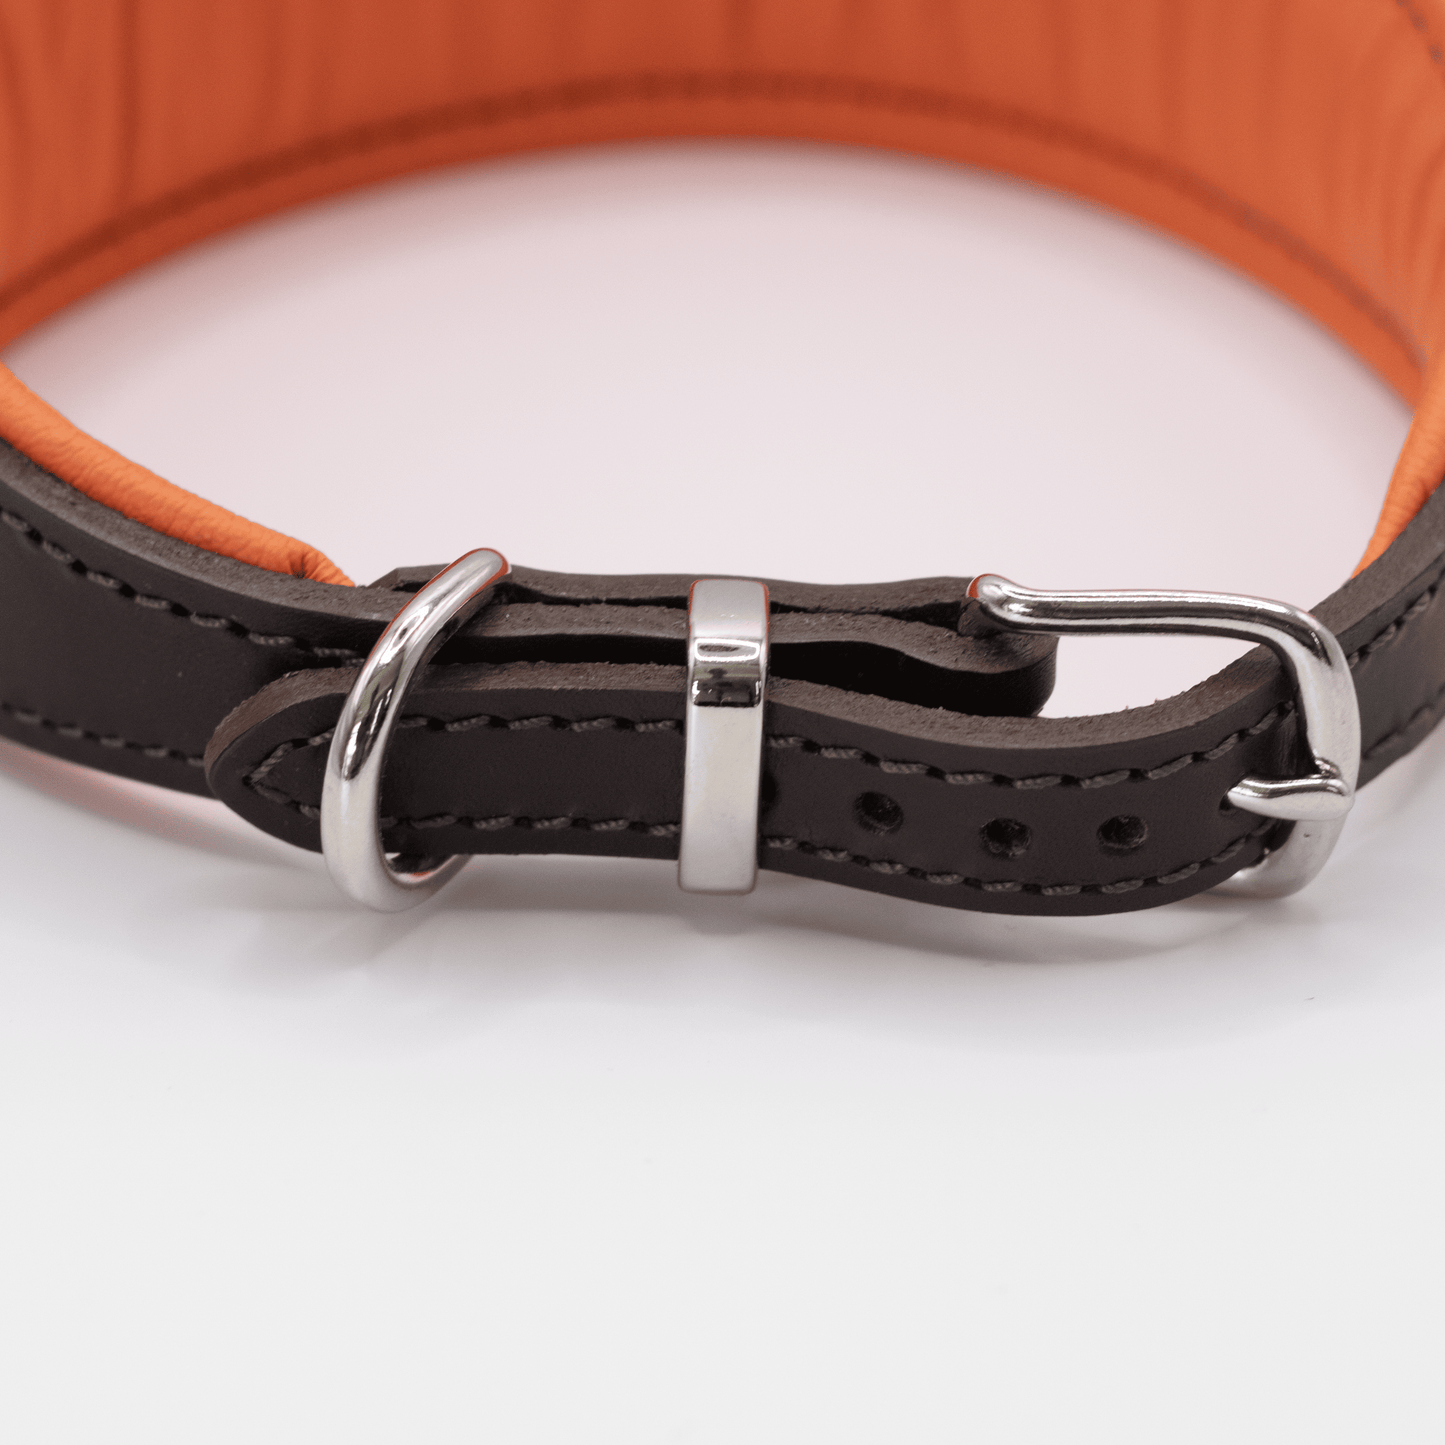 D&H Padded Leather Hound Collar Brown and Orange